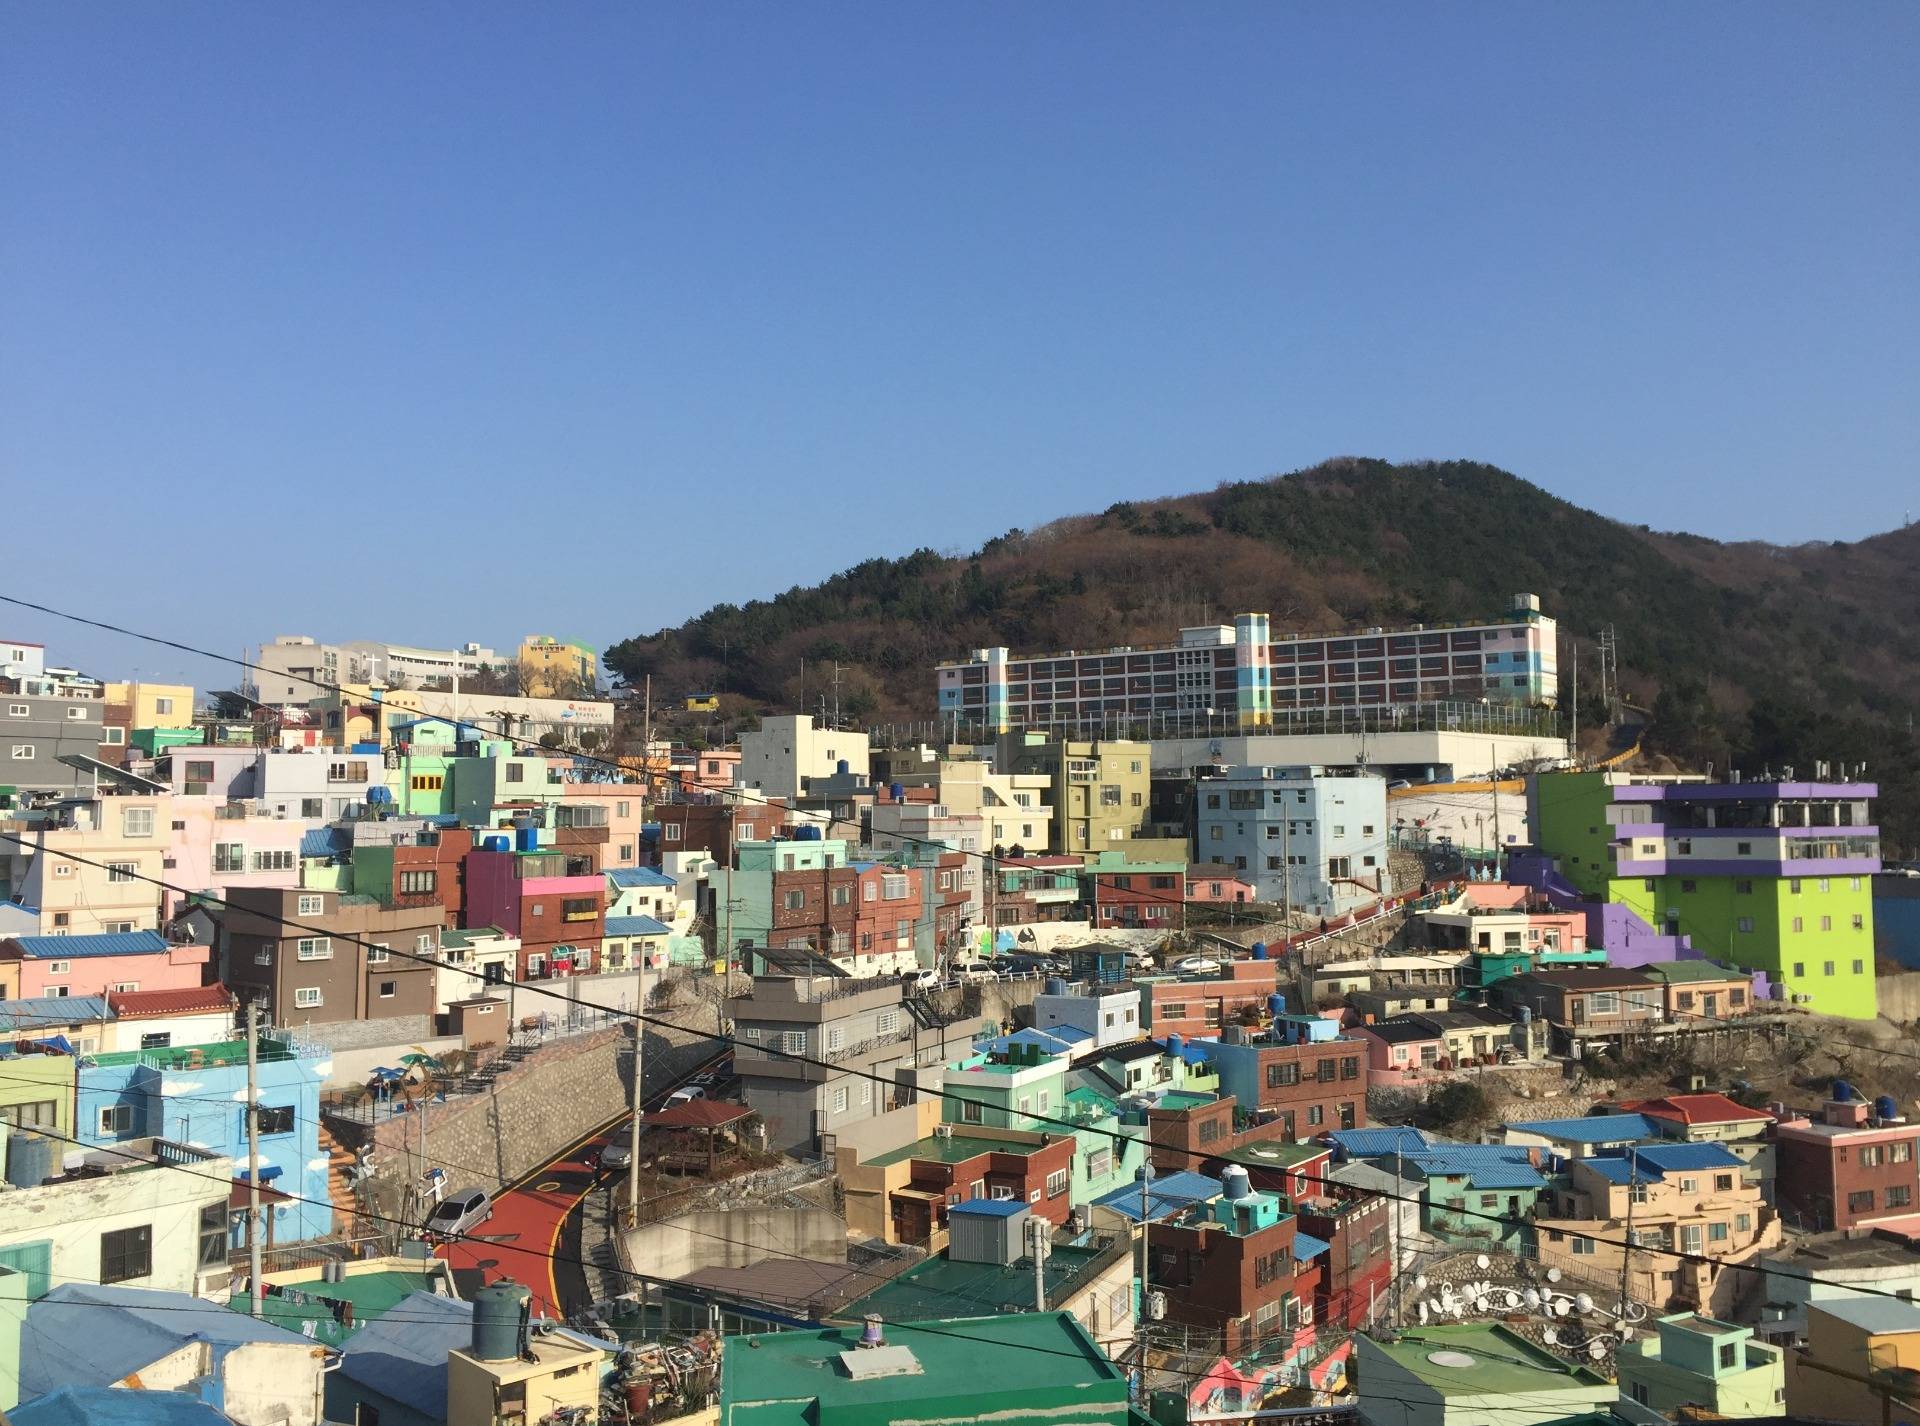 Discovering the Gamcheon Culture Village in South Korea